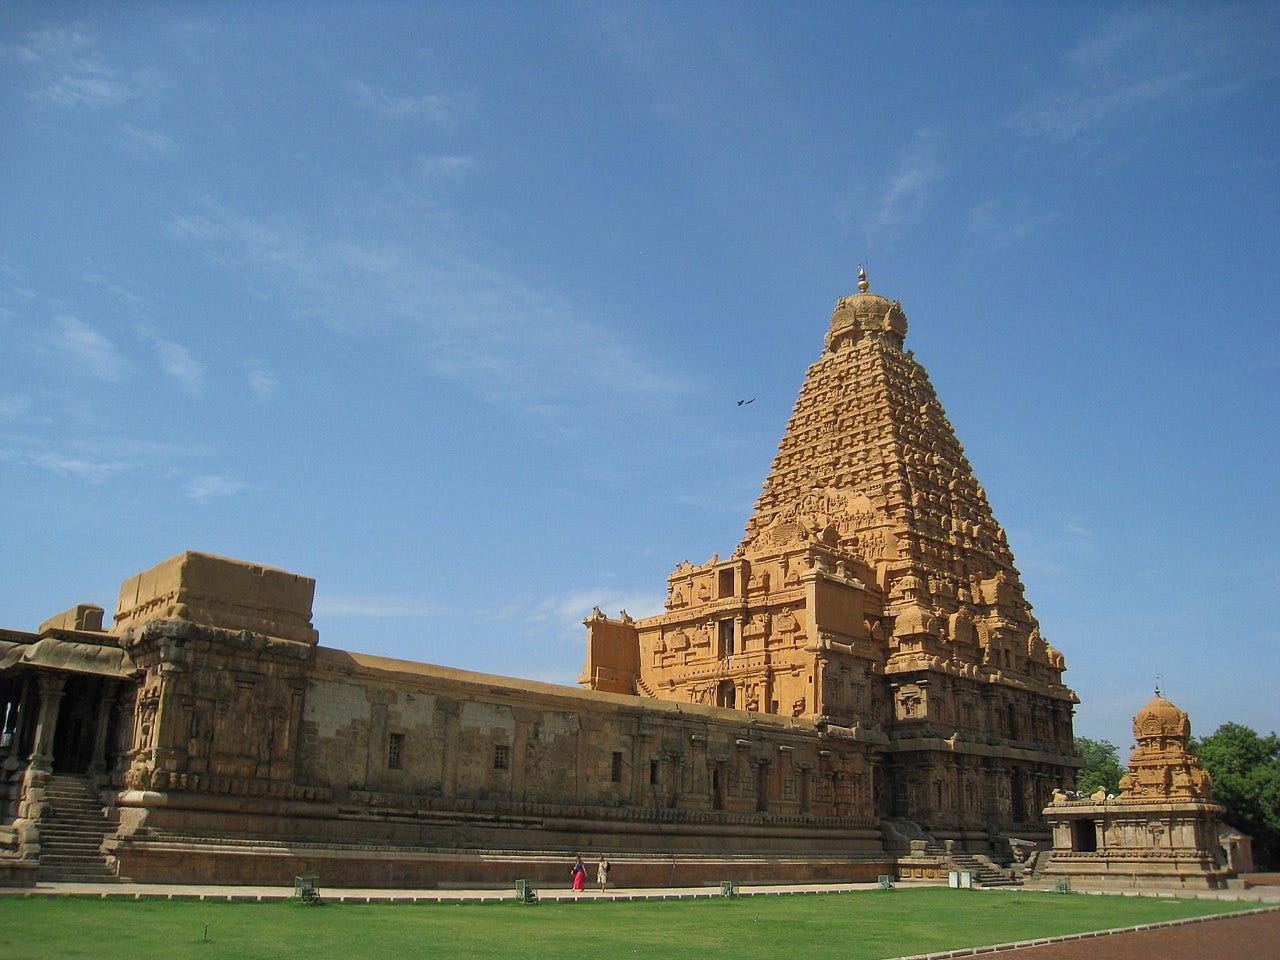 Brihadisvara temple complex is a part of the UNESCO World Heritage Site known as the Great Living Chola Temples